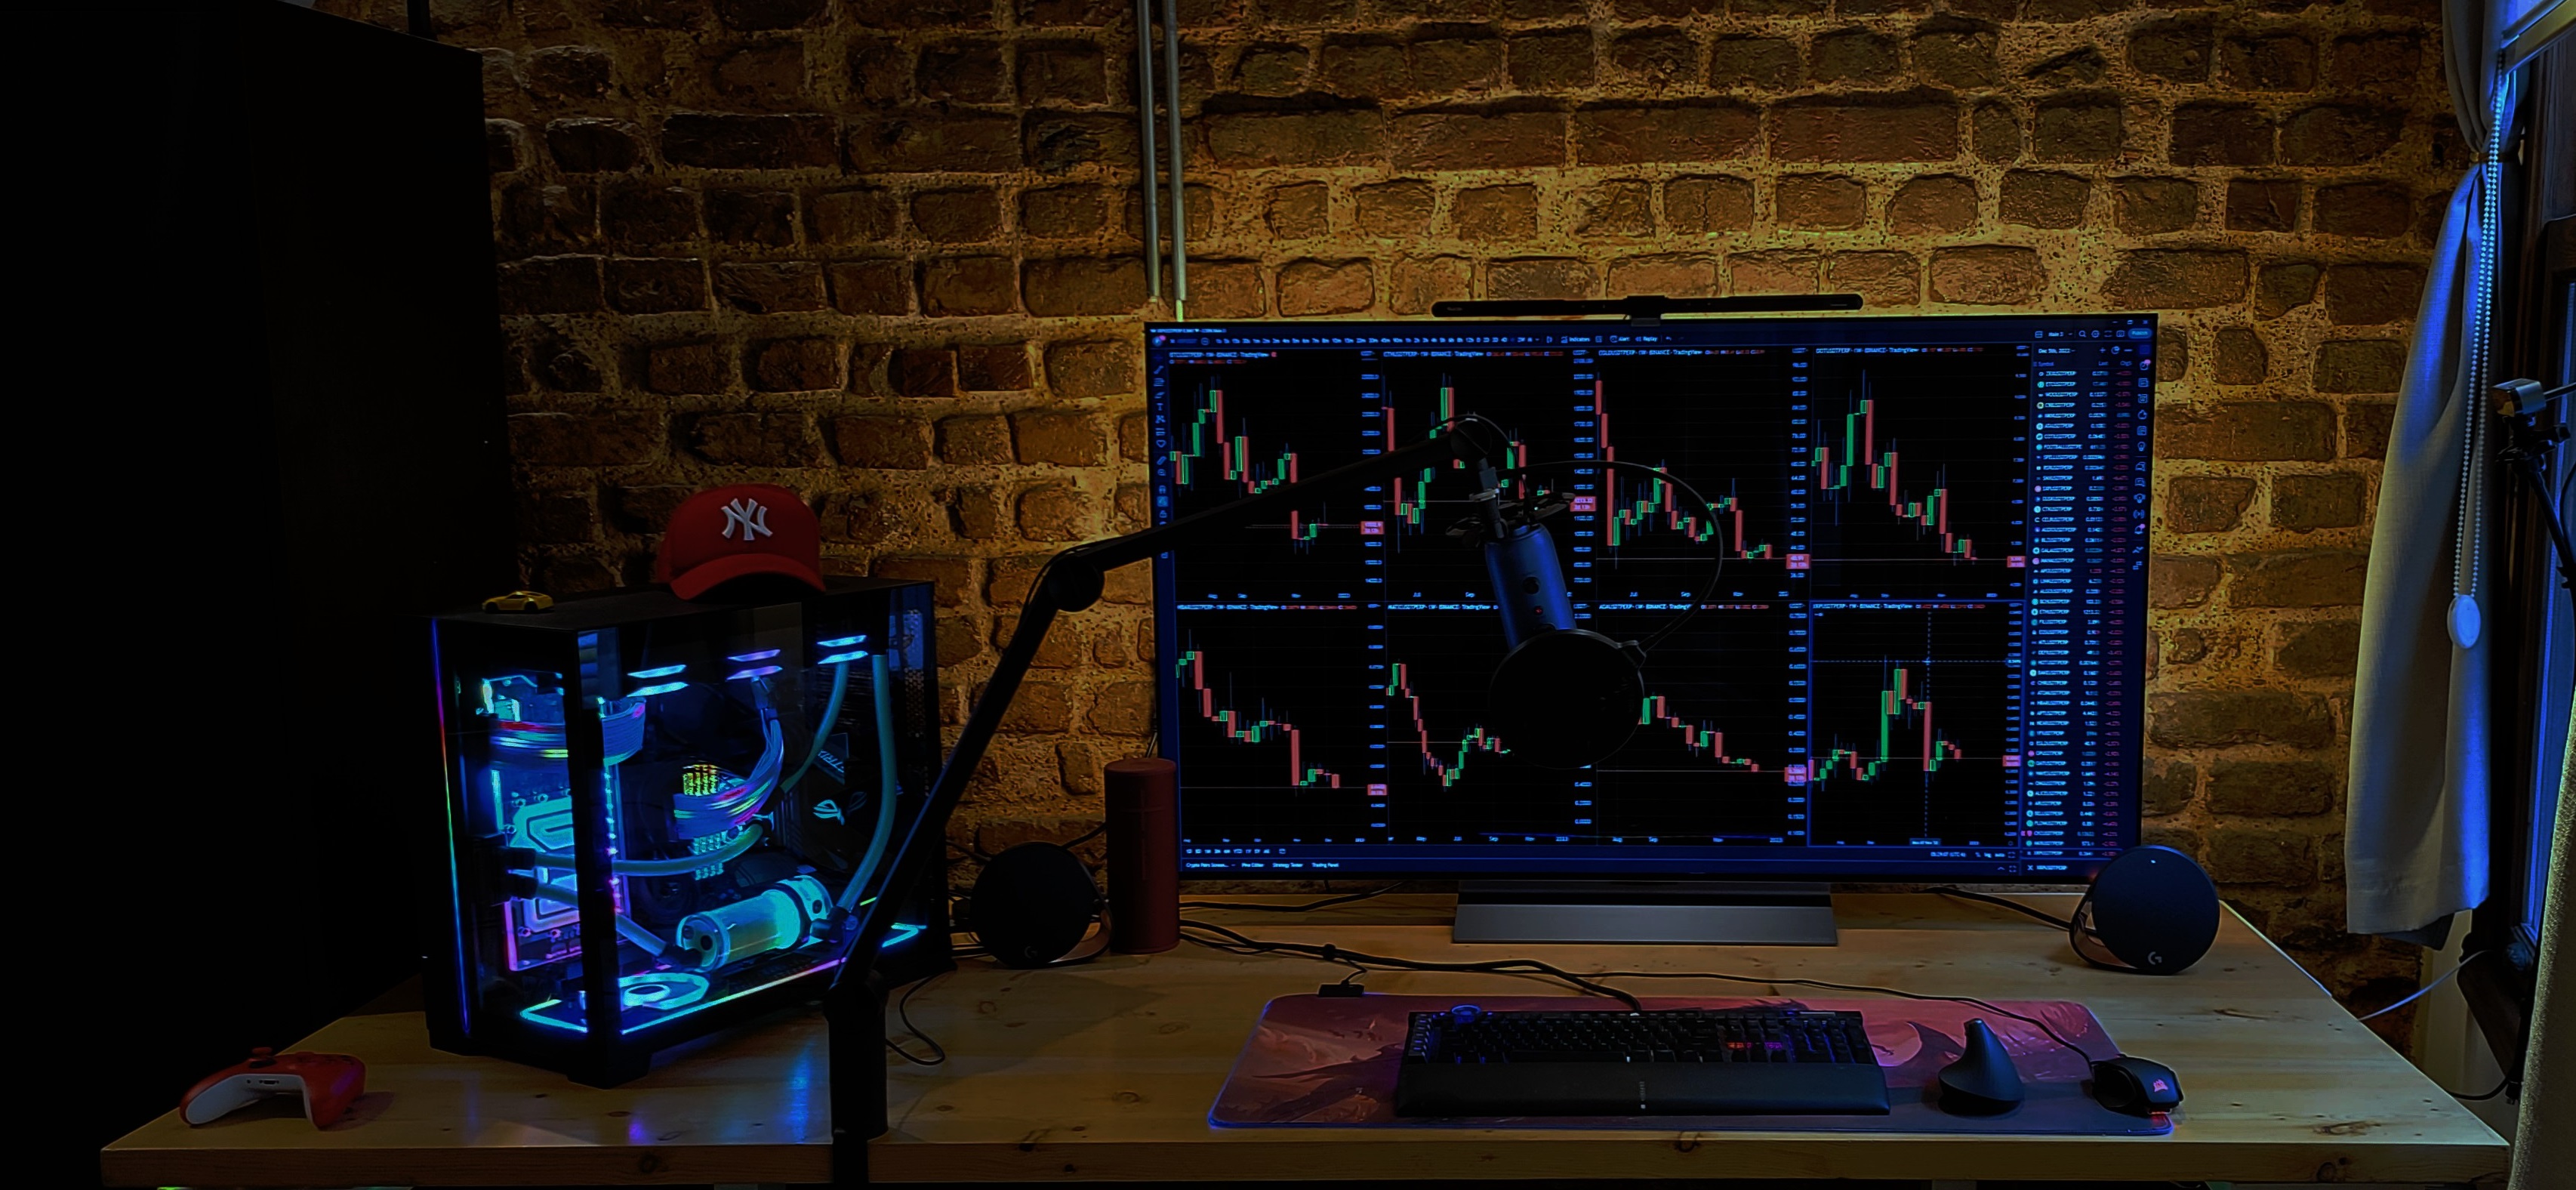 Day Trading, Cryptocurrency, Technical Analysis